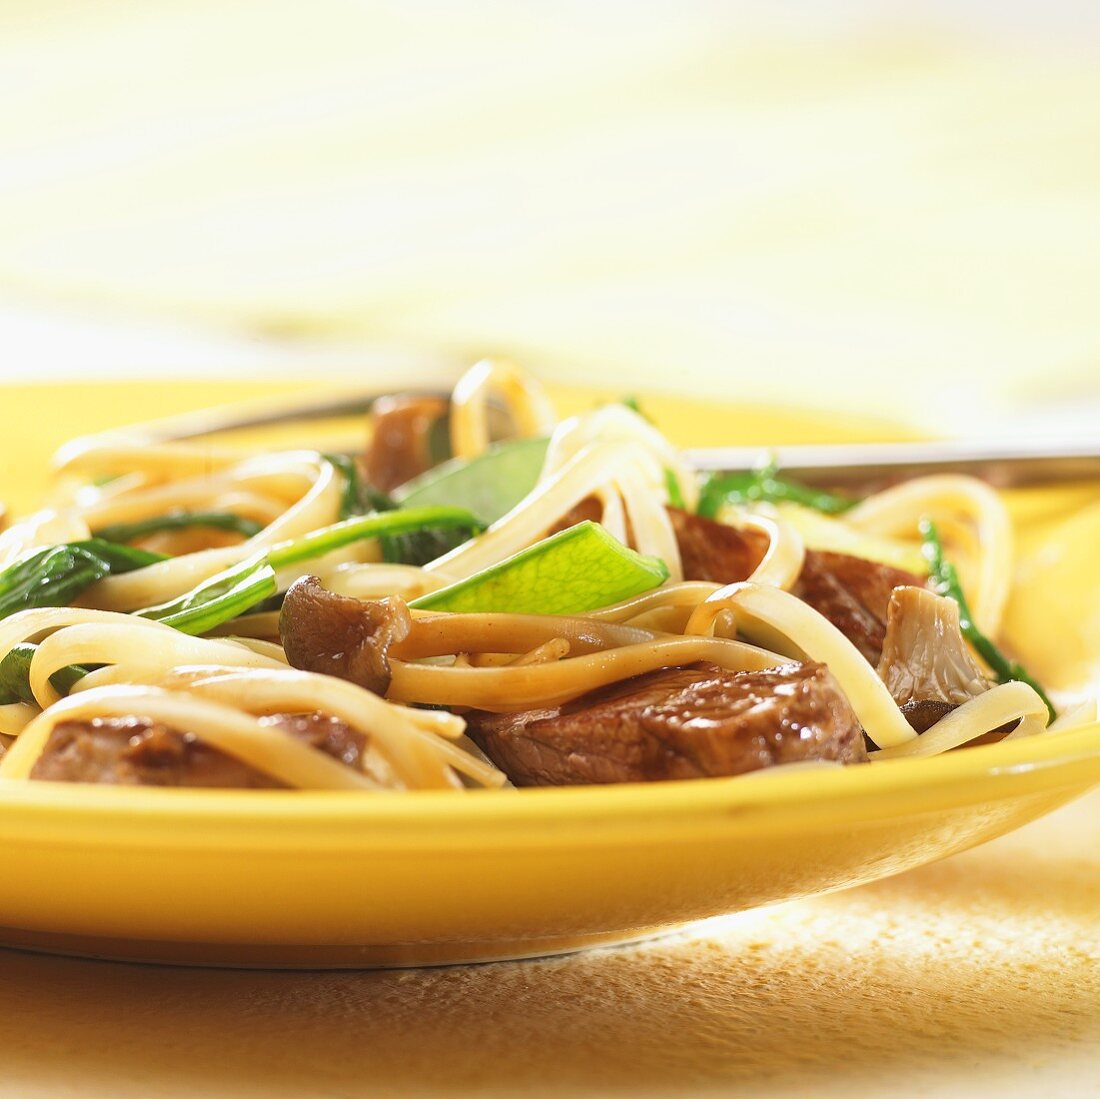 Stir-fried meat, mushrooms and mangetout with noodles